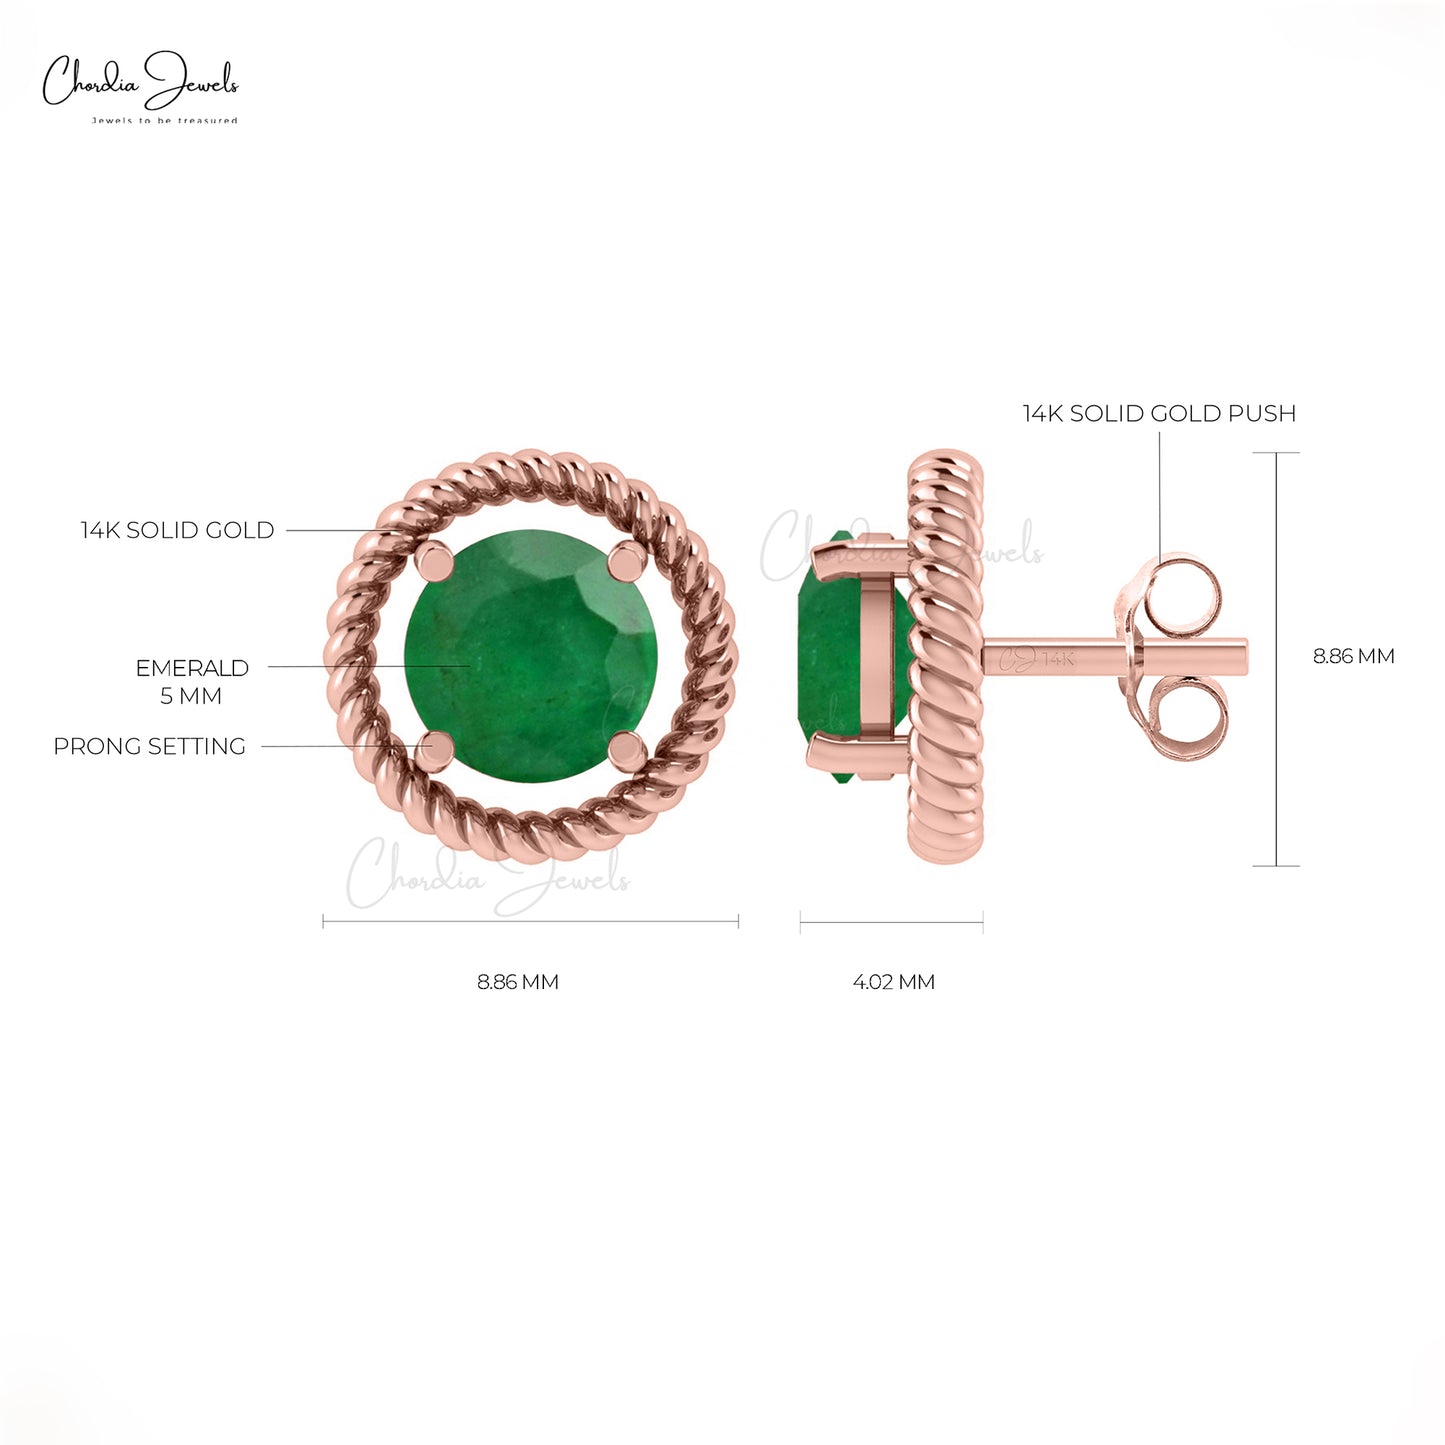 Captivate hearts with our emerald spiral earrings.